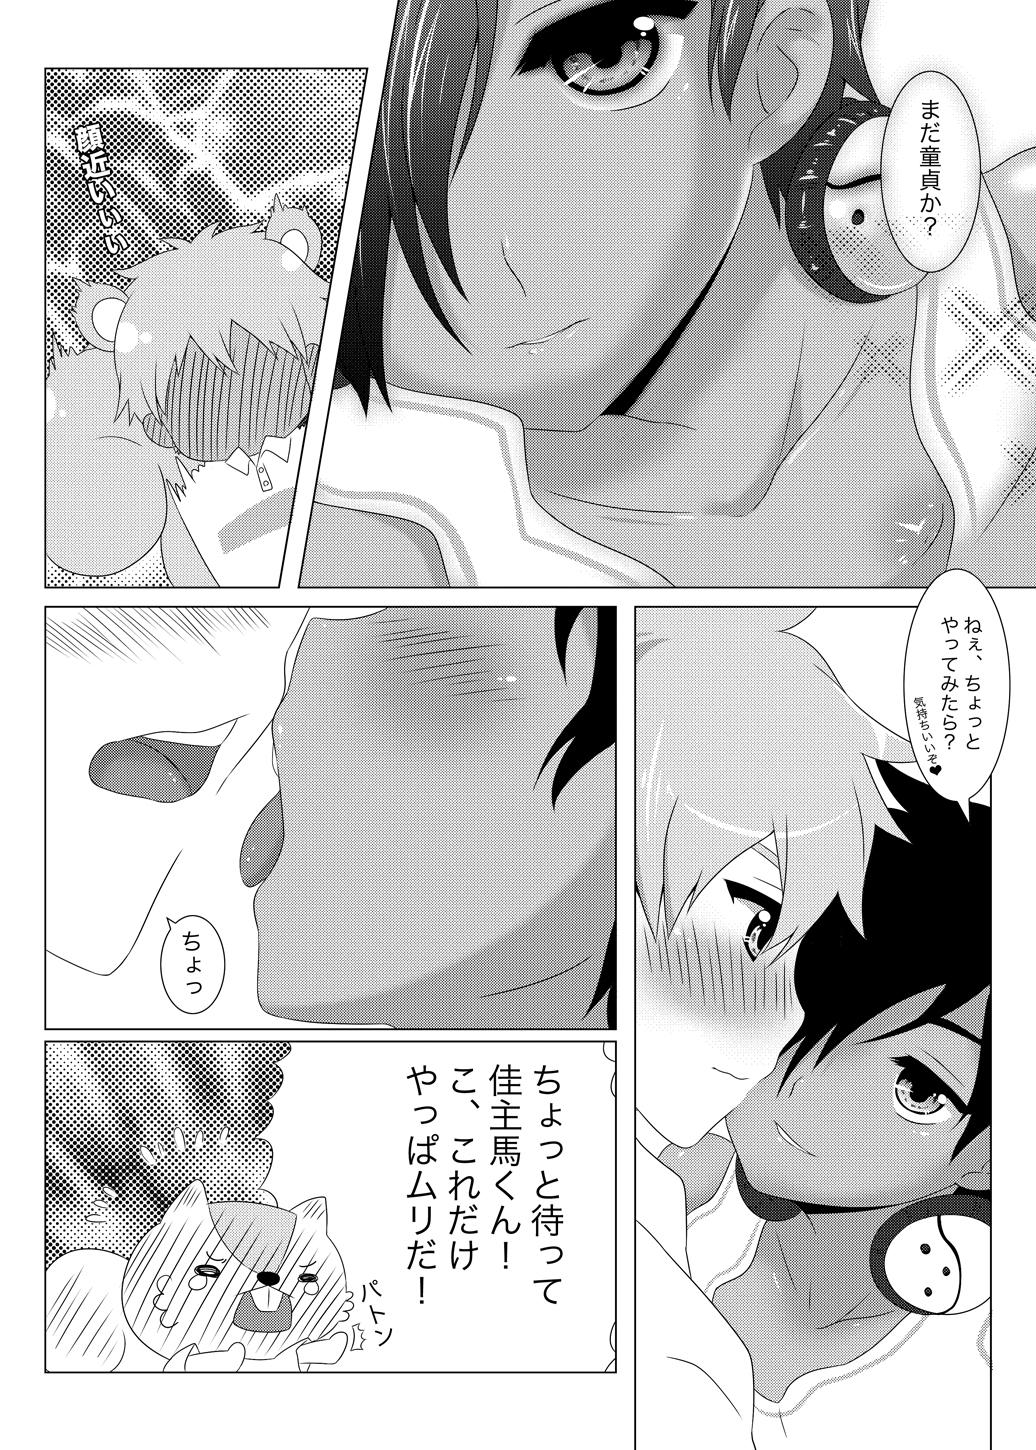 Deep Throat Another Summer 2 - Summer wars Older - Page 3